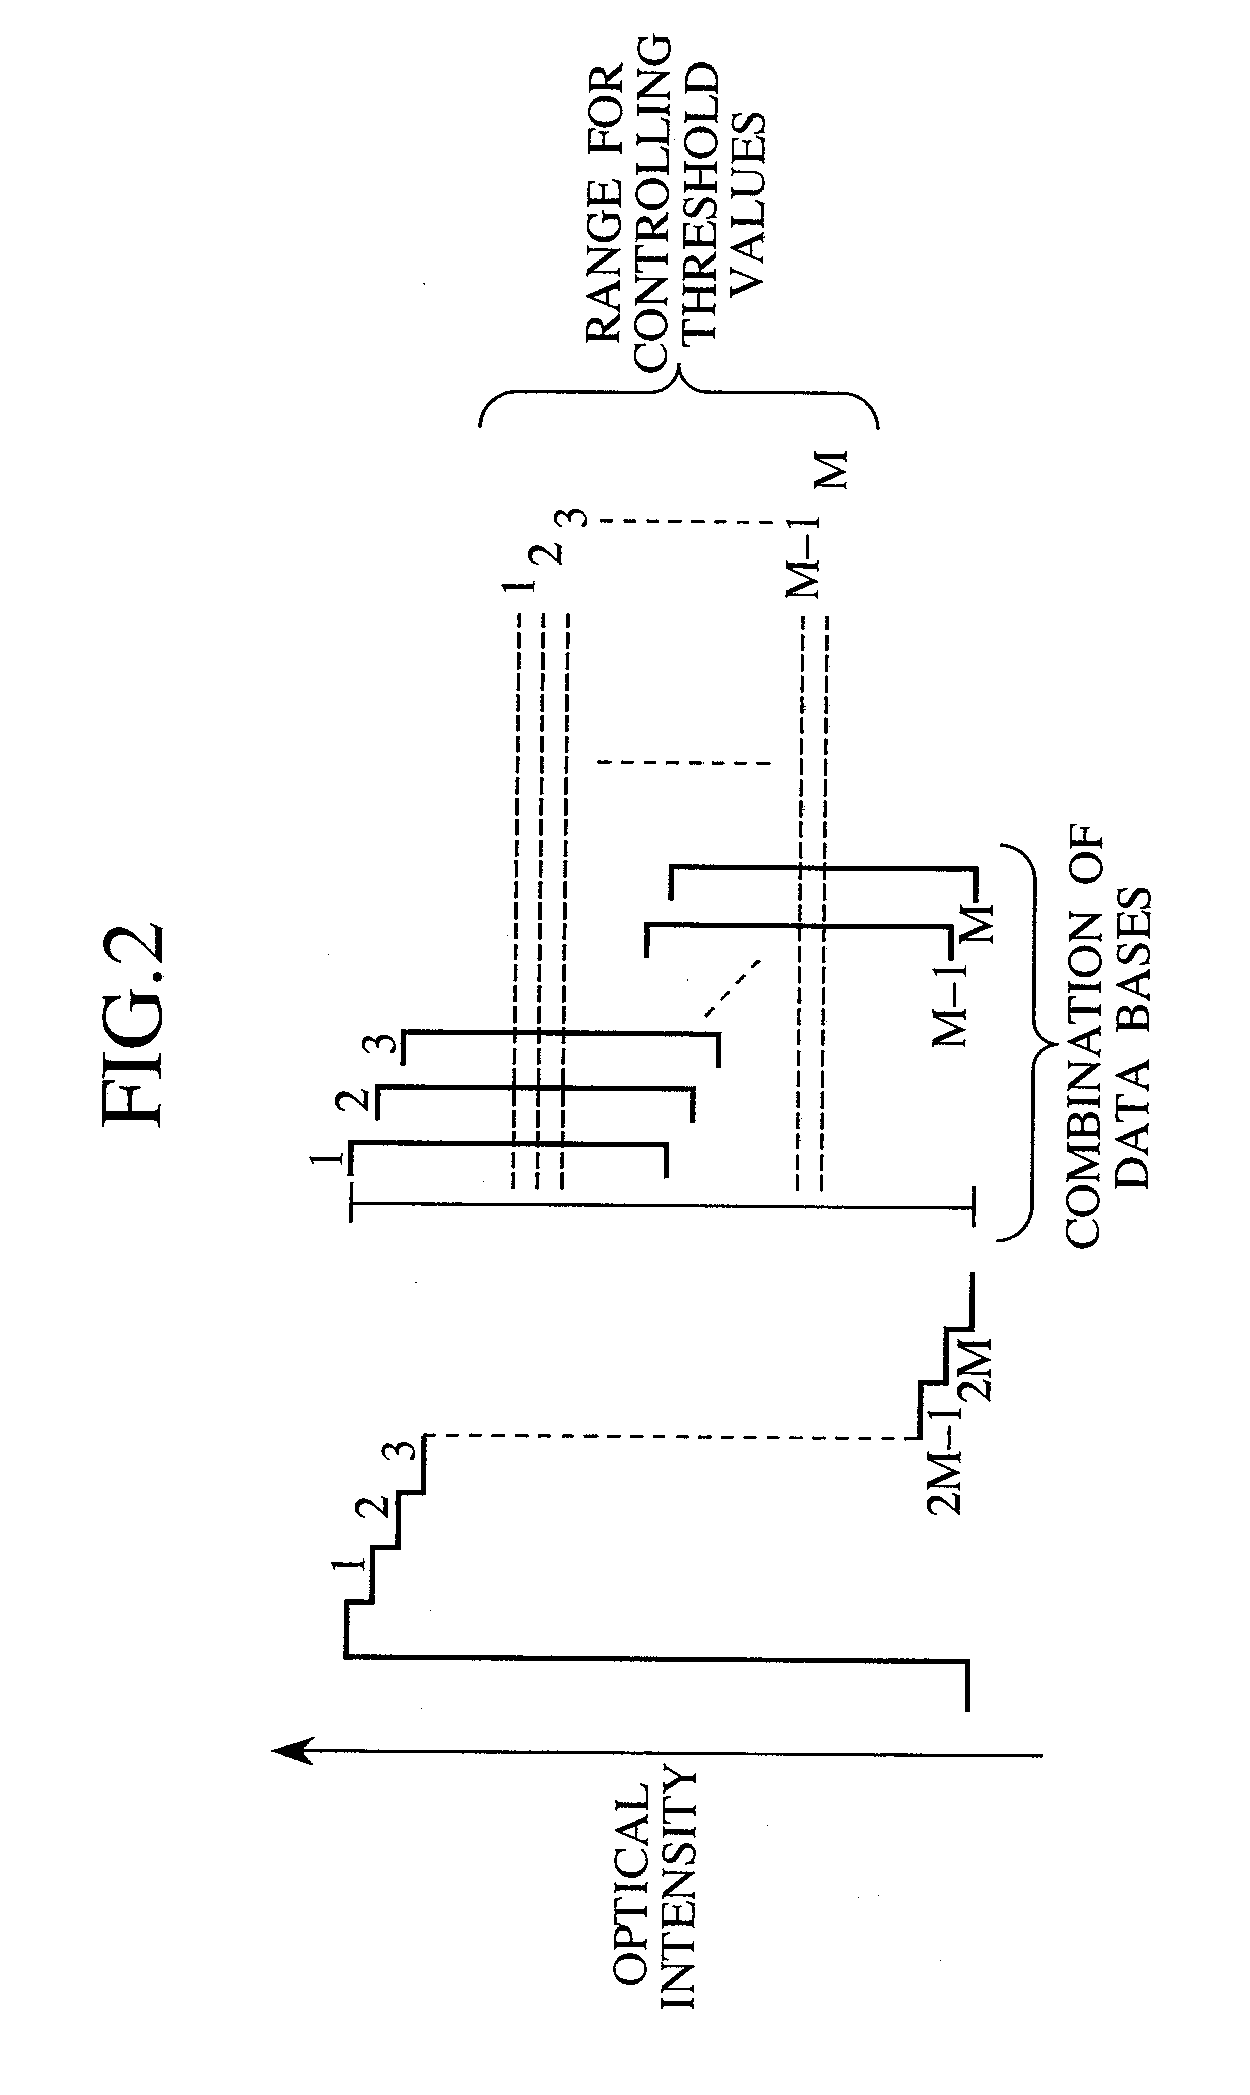 Method for synchronization in encrypted communications using shared key